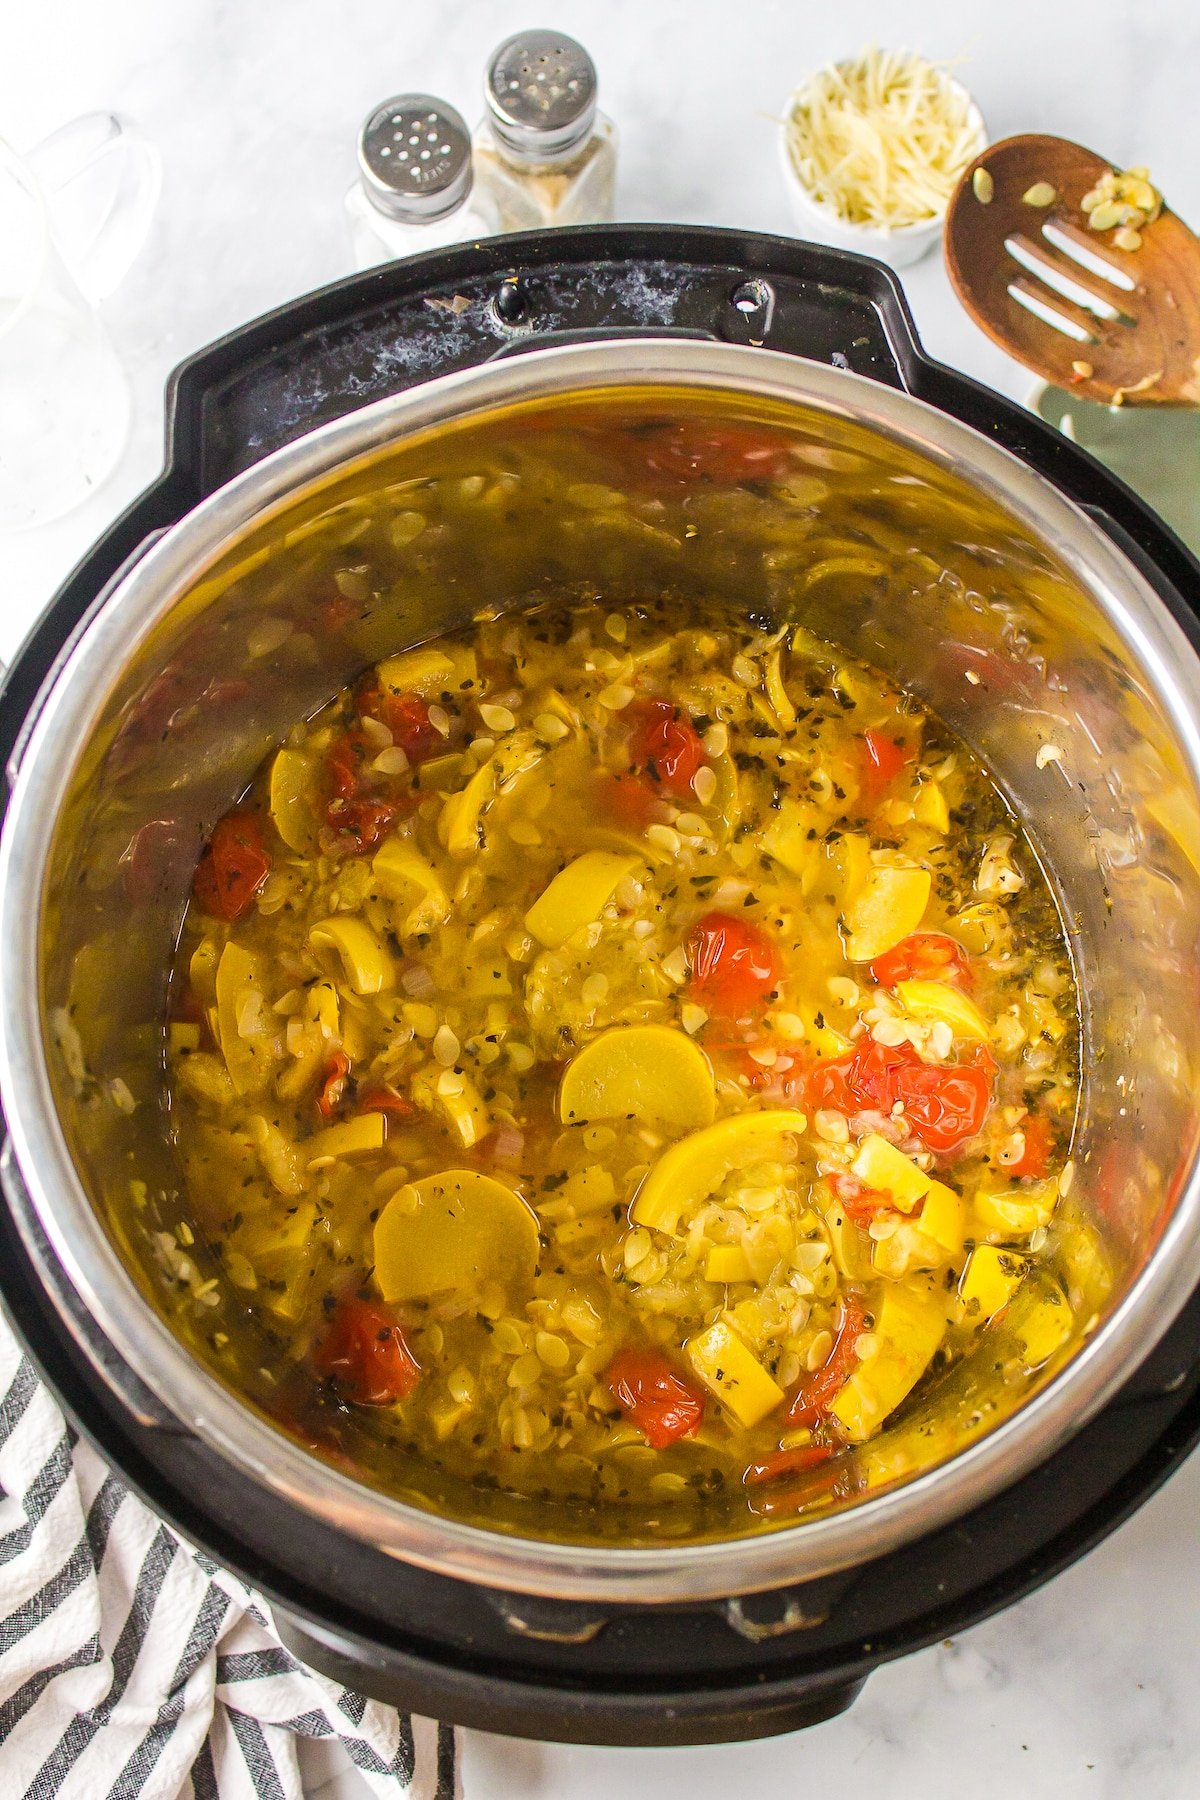 Instant Pot full of yellow squash and tomatoes.